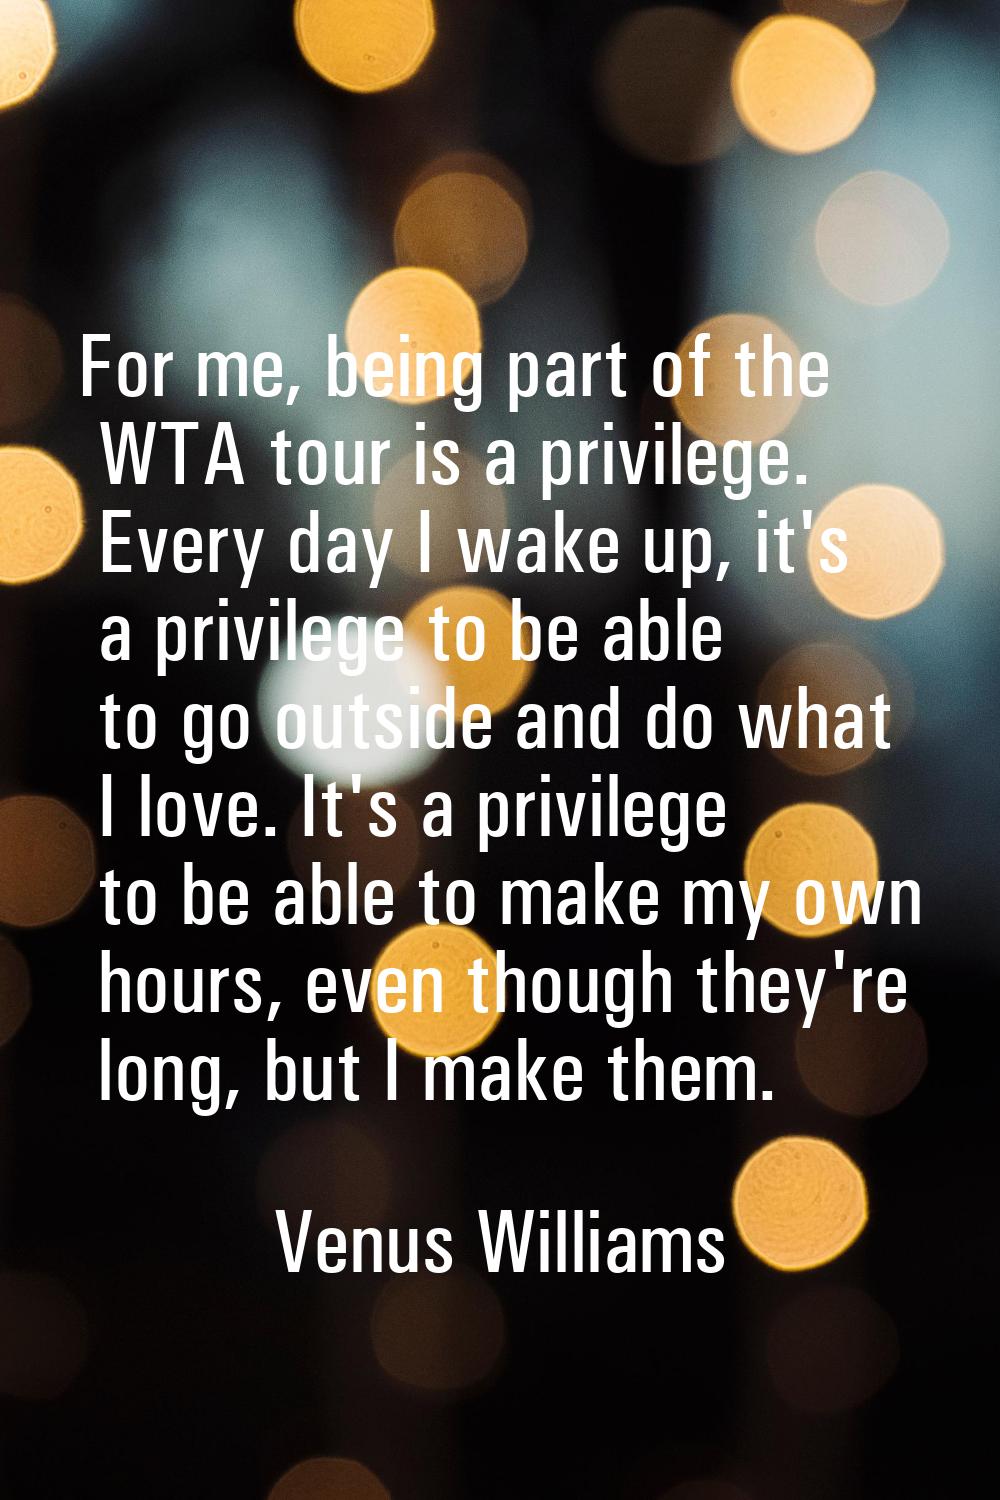 For me, being part of the WTA tour is a privilege. Every day I wake up, it's a privilege to be able